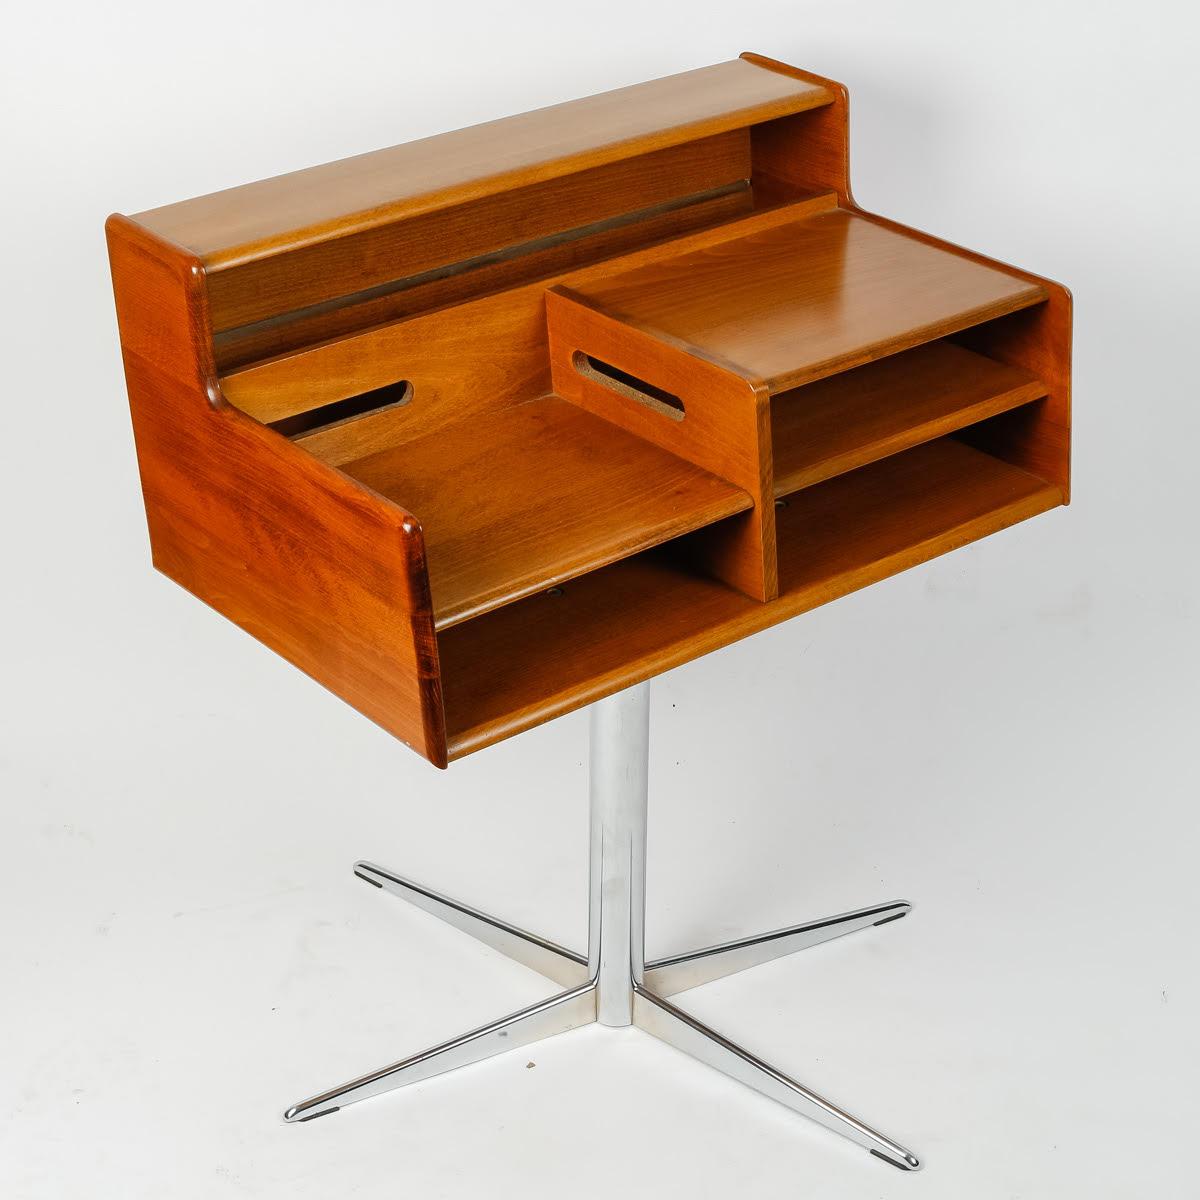 Small 1970s desk.

Small desk in light wood with chrome-plated metal legs.
h: 76cm, w: 60cm, d: 40cm